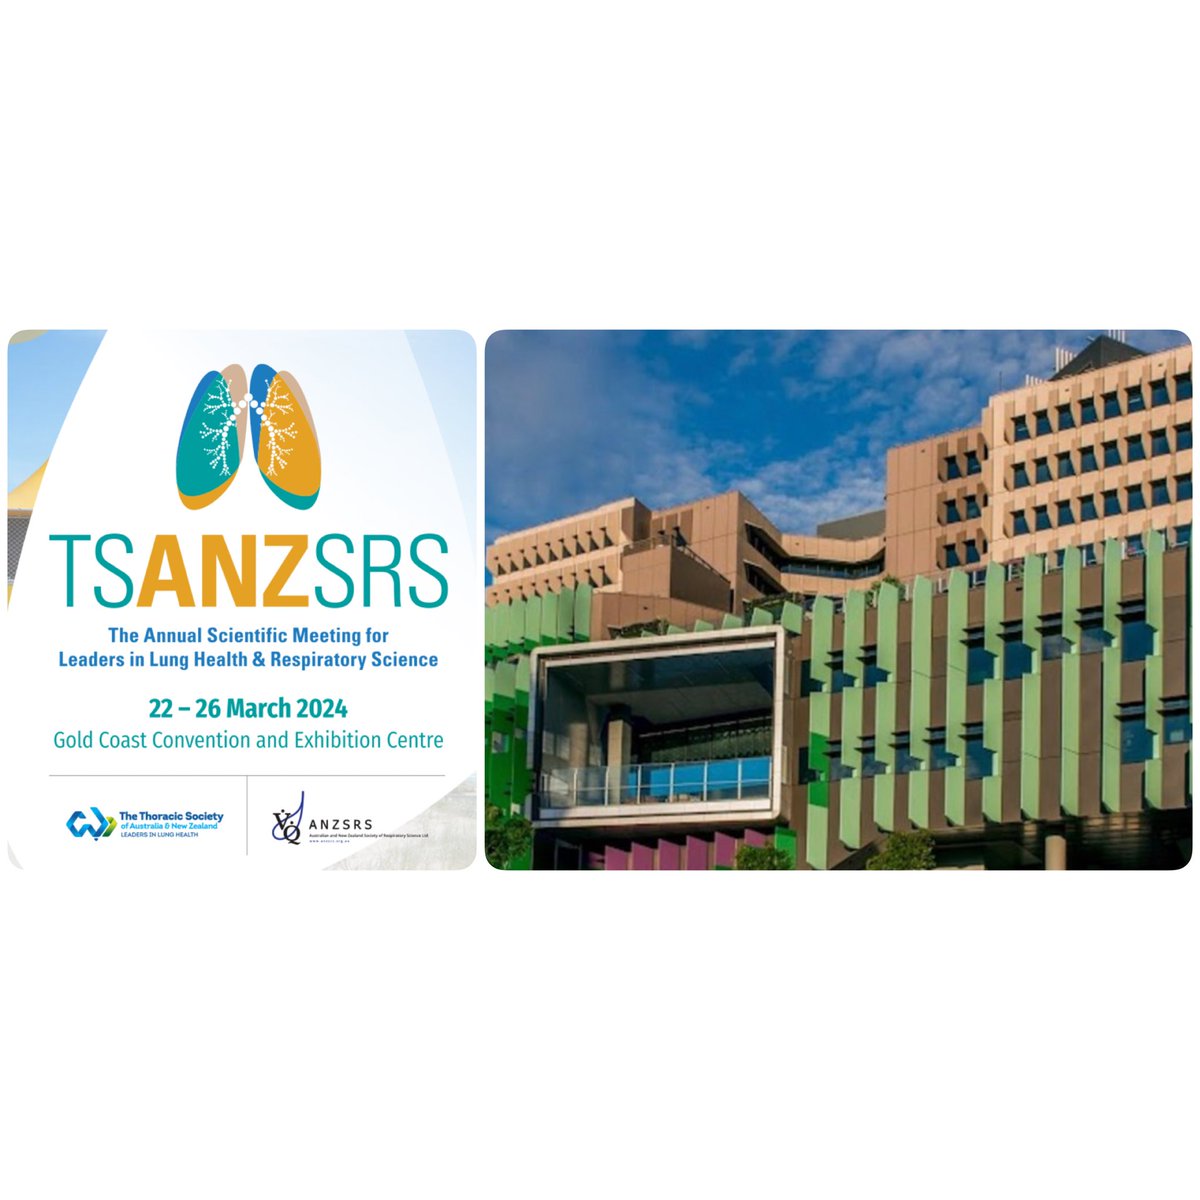 Looking forward to a great #TSANZSRS2024 - lots of interesting content & strong #QCH representation across sessions at all levels of our department…. So much so we’re even pitted against each other in pro-con debates 😬😂 will be fun @tsanz_thoracic @childhealthqld @qldchildres